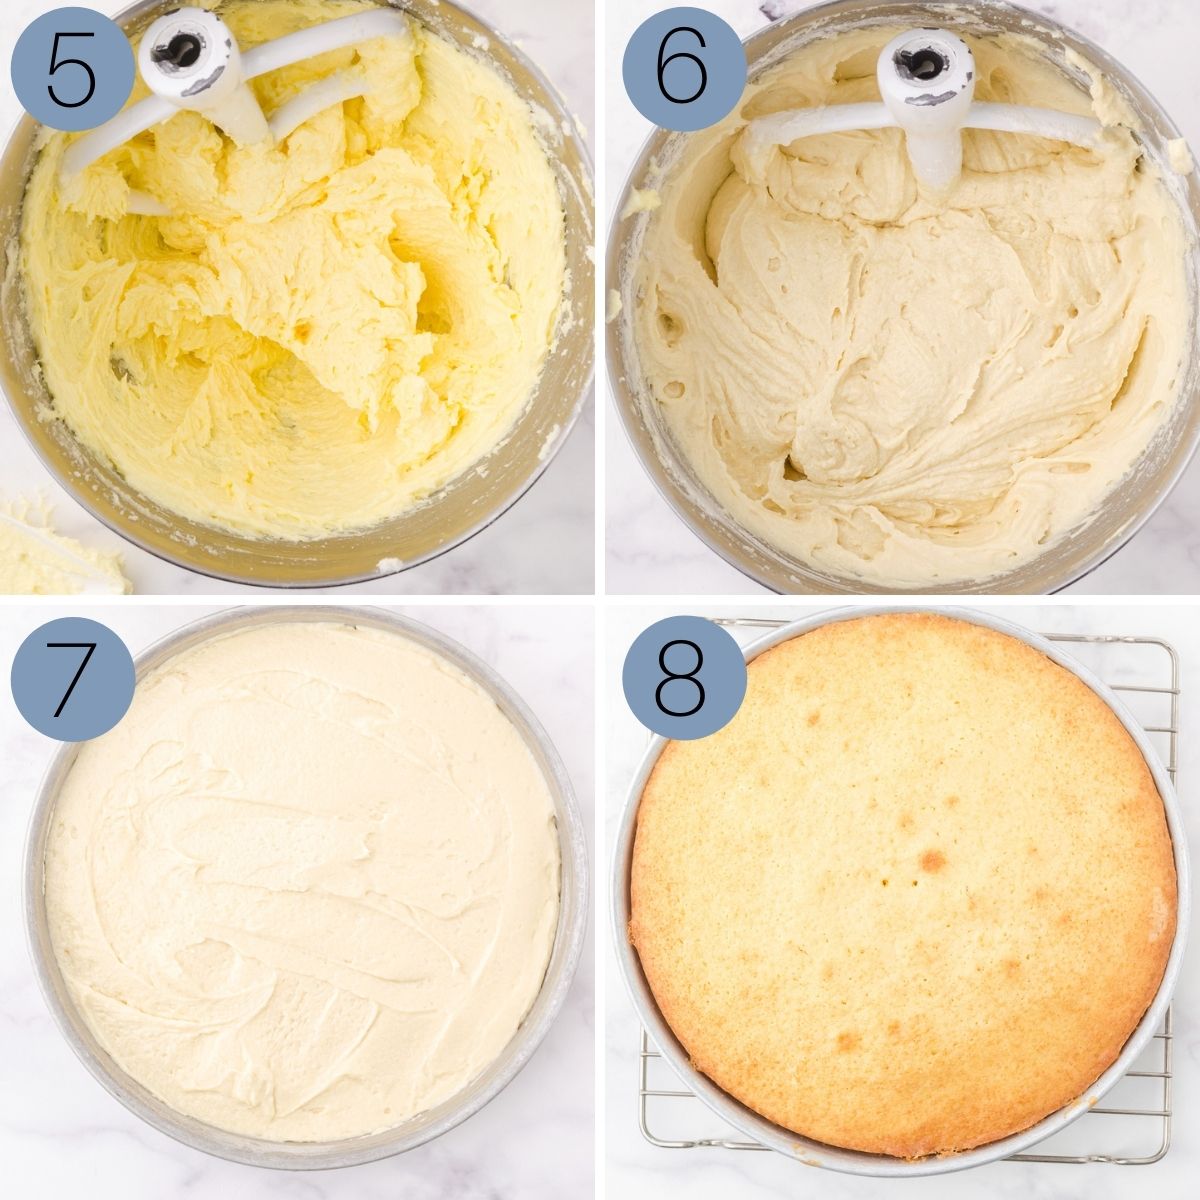 instructions for steps five to 8 of making the cake batter